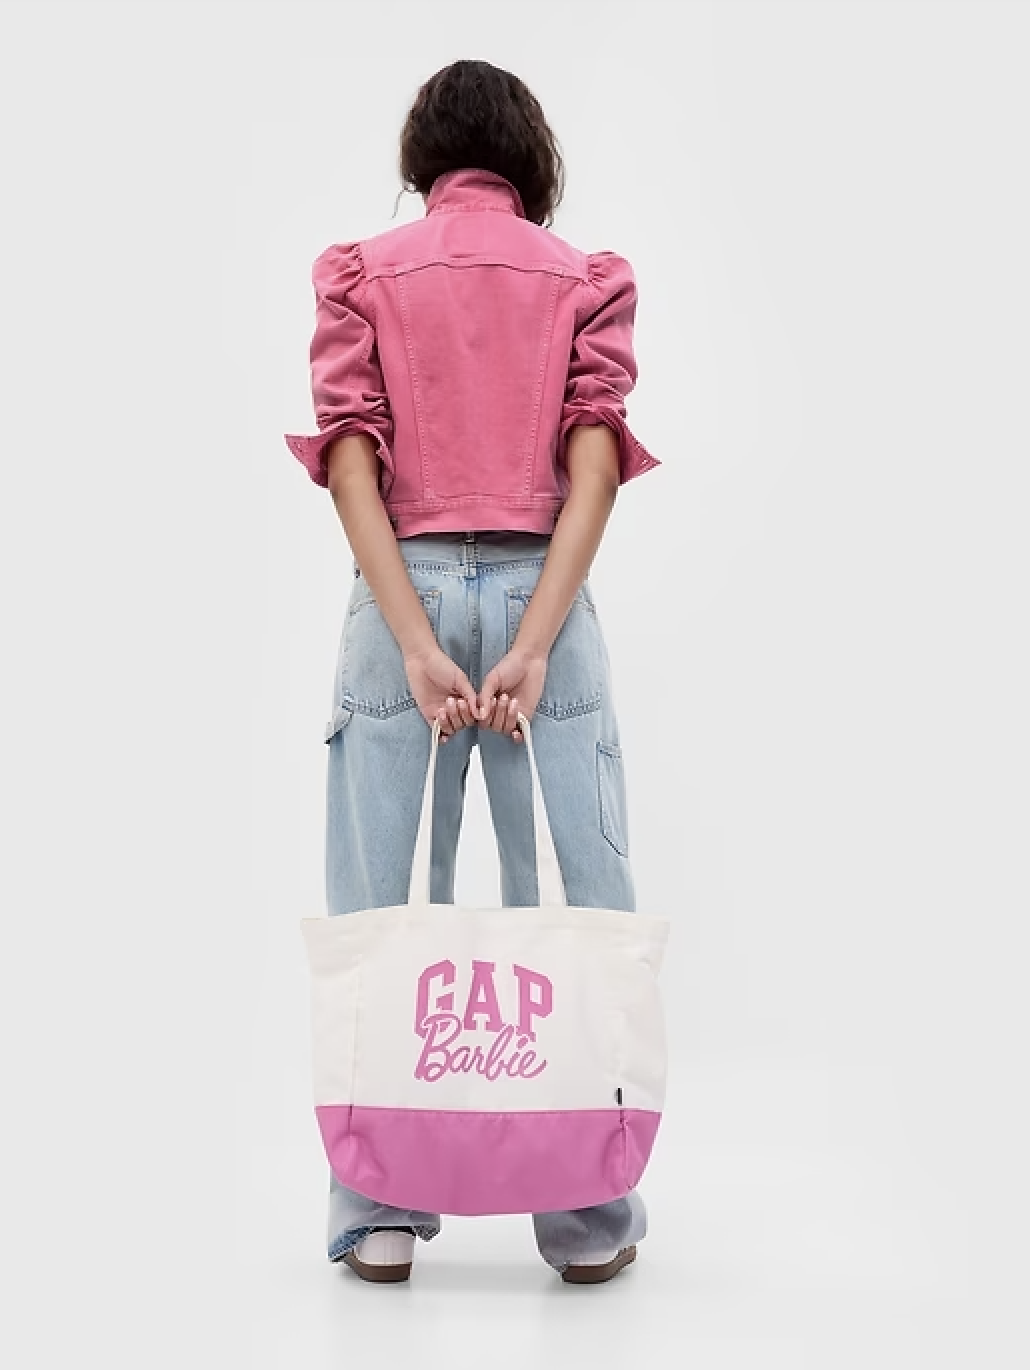 A model standing with their back to the camera while wearing the barbie gap jacket and holding the bag